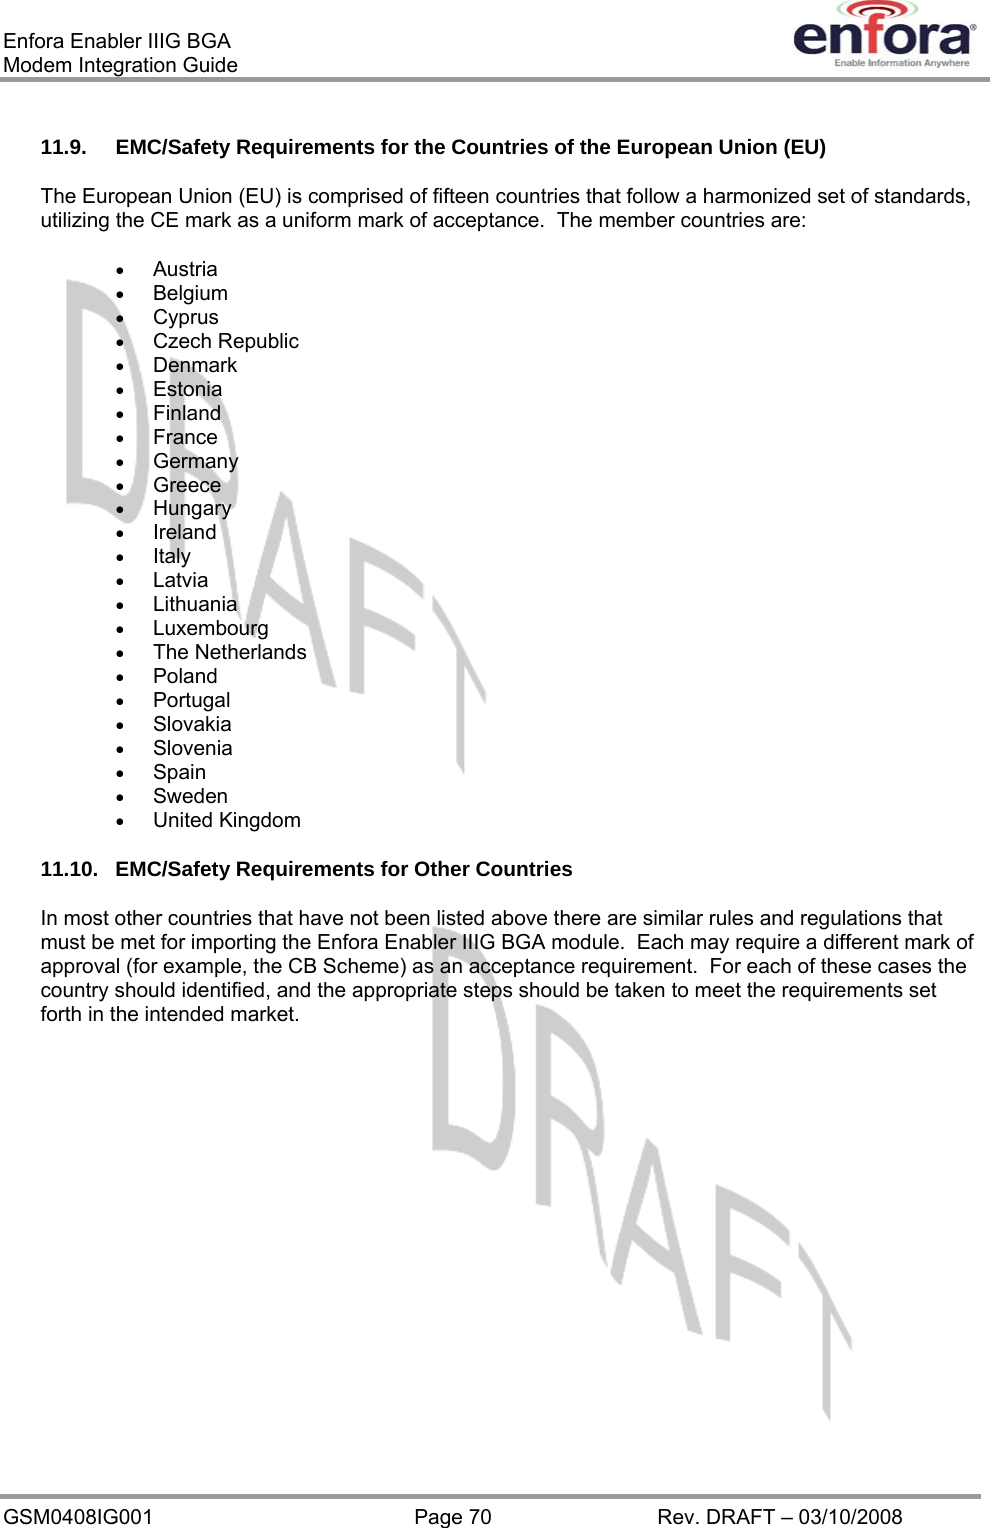 Enfora Enabler IIIG BGA Modem Integration Guide 11.9.  EMC/Safety Requirements for the Countries of the European Union (EU) The European Union (EU) is comprised of fifteen countries that follow a harmonized set of standards, utilizing the CE mark as a uniform mark of acceptance.  The member countries are: •  Austria •  Belgium •  Cyprus •  Czech Republic •  Denmark •  Estonia •  Finland •  France •  Germany •  Greece •  Hungary •  Ireland •  Italy •  Latvia •  Lithuania •  Luxembourg •  The Netherlands •  Poland •  Portugal •  Slovakia •  Slovenia •  Spain •  Sweden •  United Kingdom 11.10. EMC/Safety Requirements for Other Countries In most other countries that have not been listed above there are similar rules and regulations that must be met for importing the Enfora Enabler IIIG BGA module.  Each may require a different mark of approval (for example, the CB Scheme) as an acceptance requirement.  For each of these cases the country should identified, and the appropriate steps should be taken to meet the requirements set forth in the intended market. GSM0408IG001  Page 70  Rev. DRAFT – 03/10/2008 